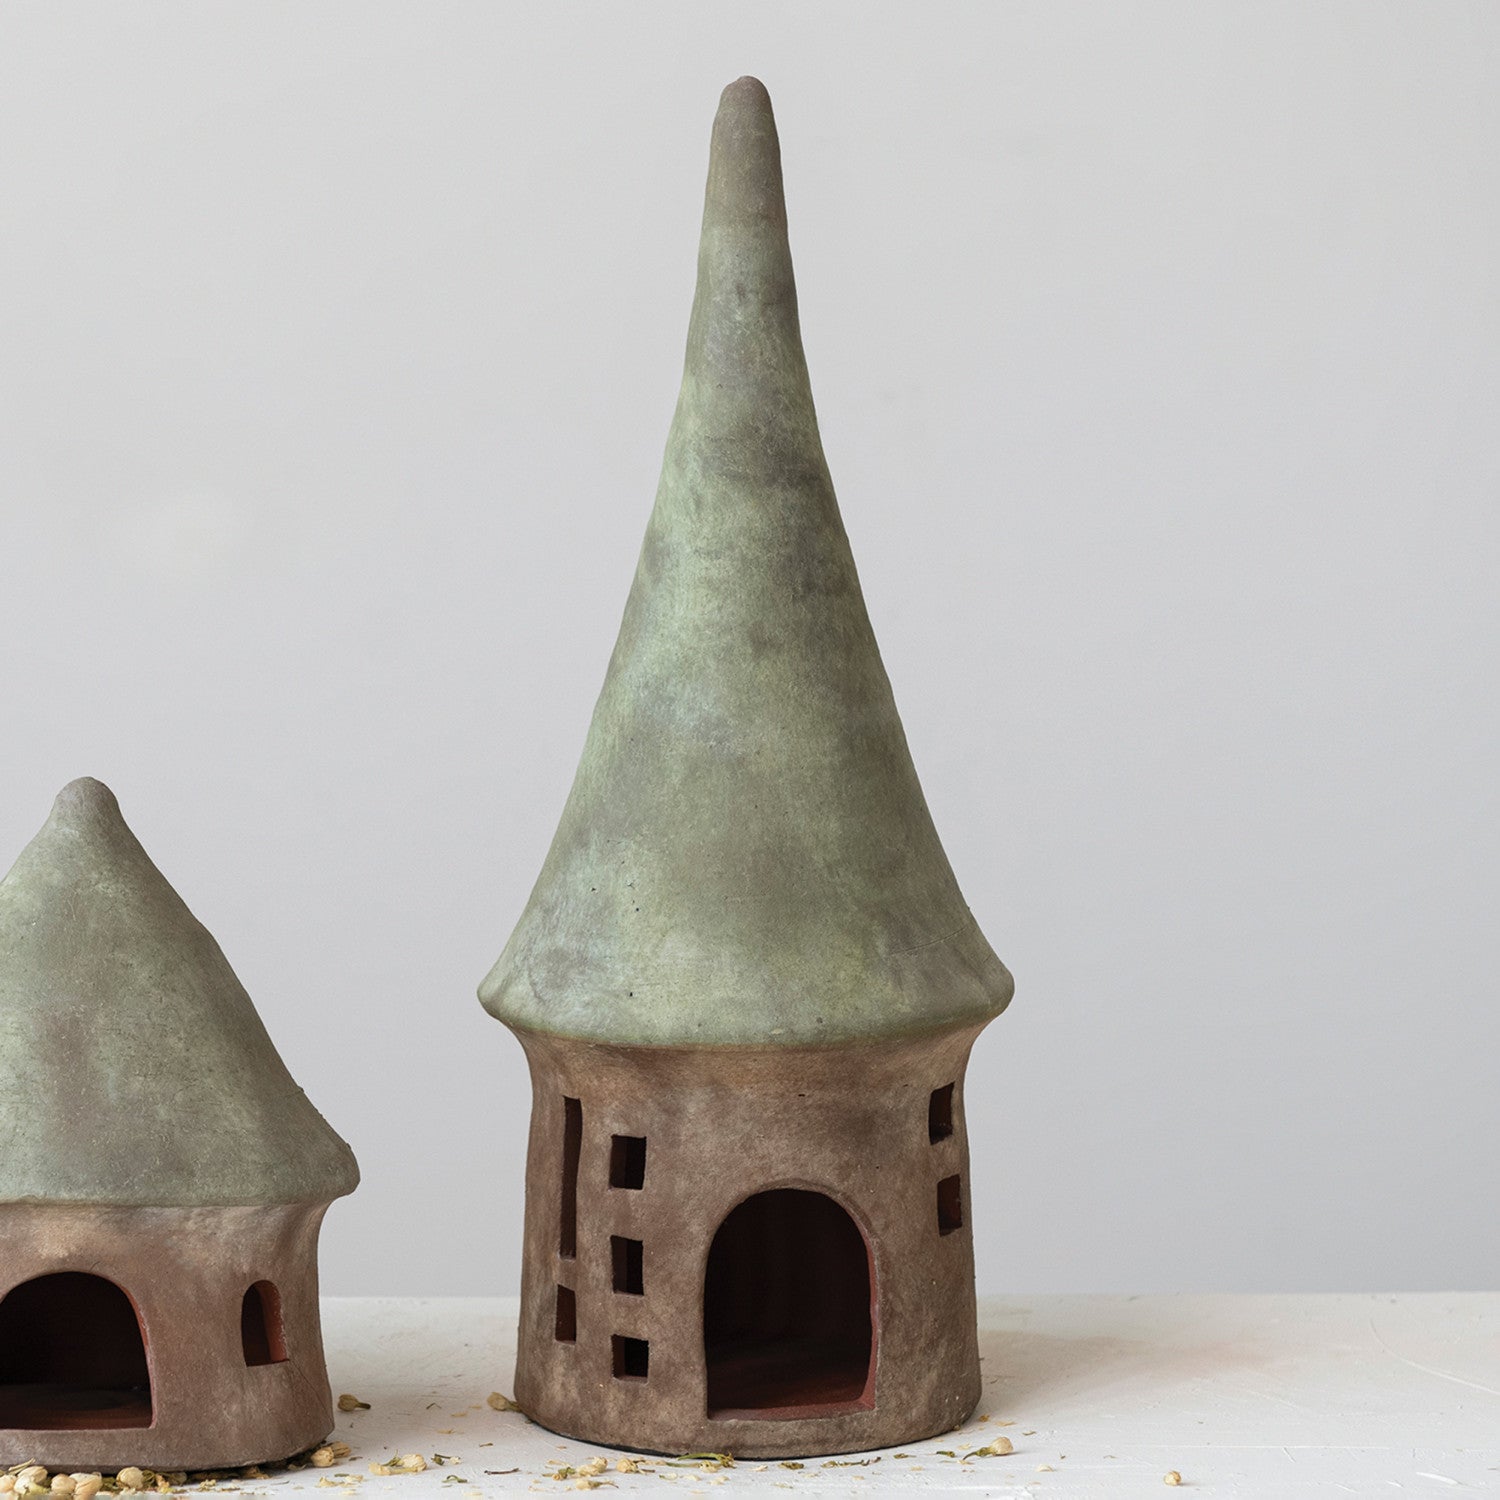 Terra-cotta Toad House, Green & Natural